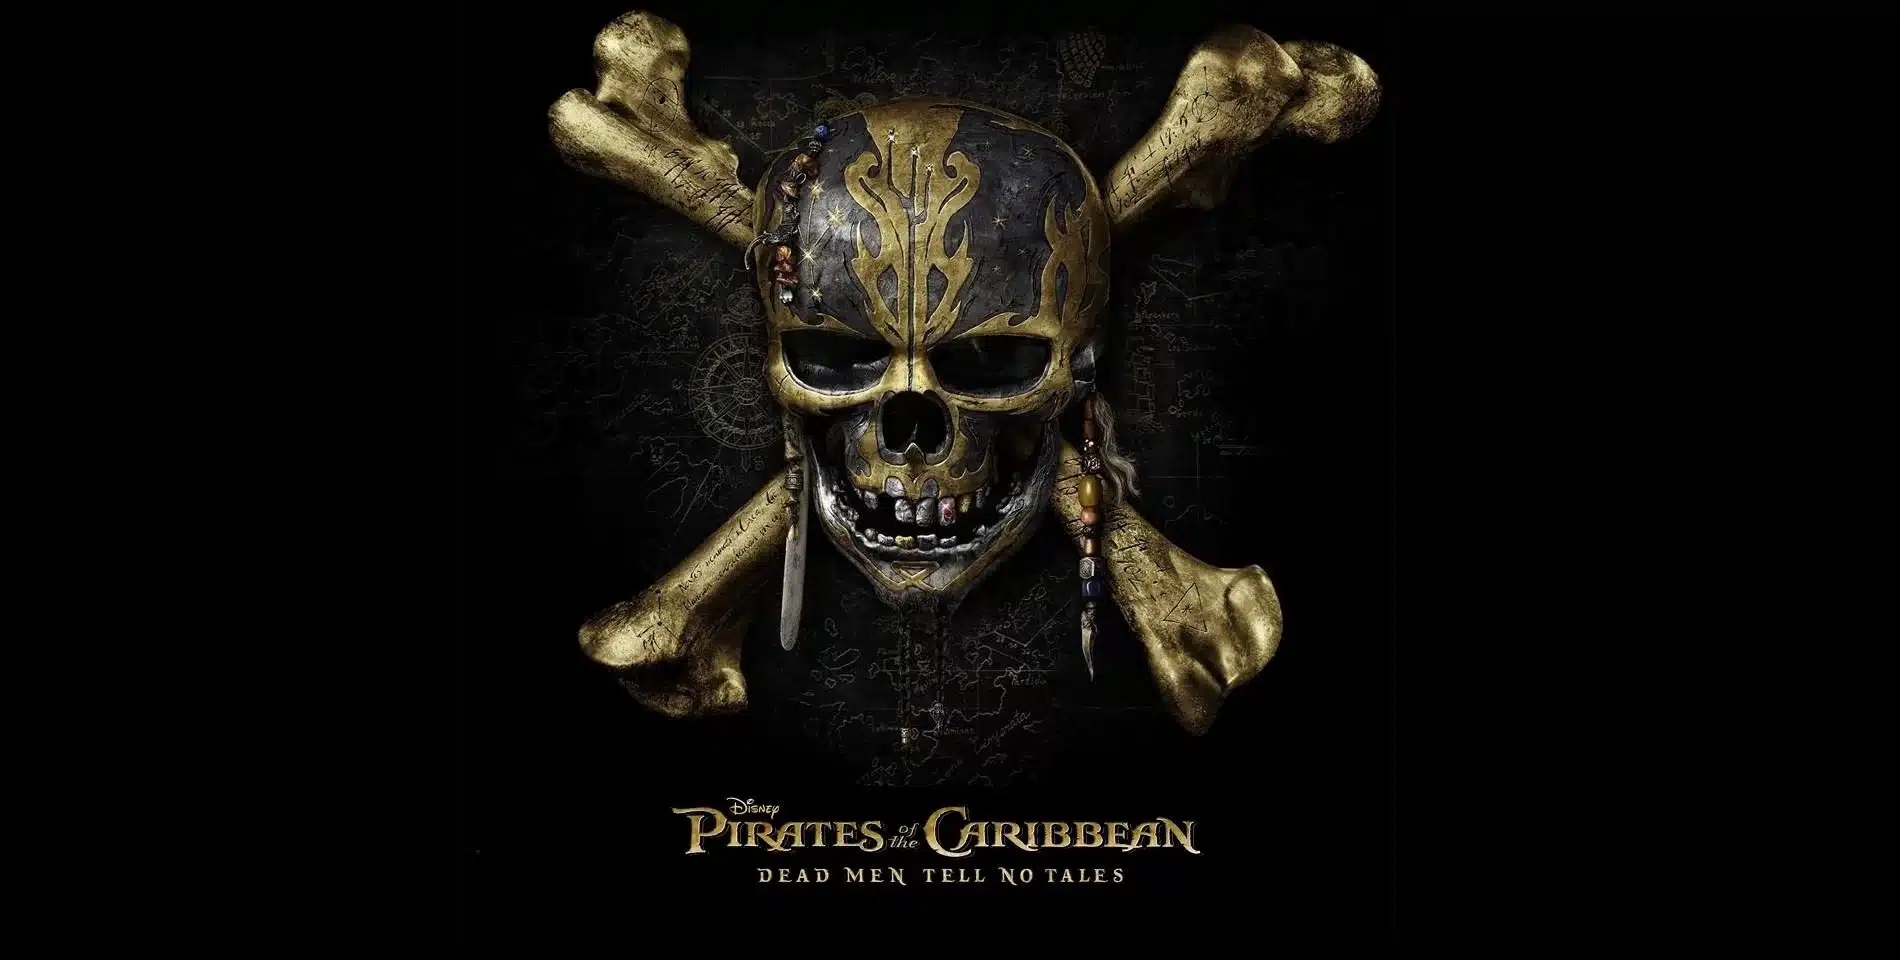 Pirates Of The Caribbean 5 Teaser Trailer